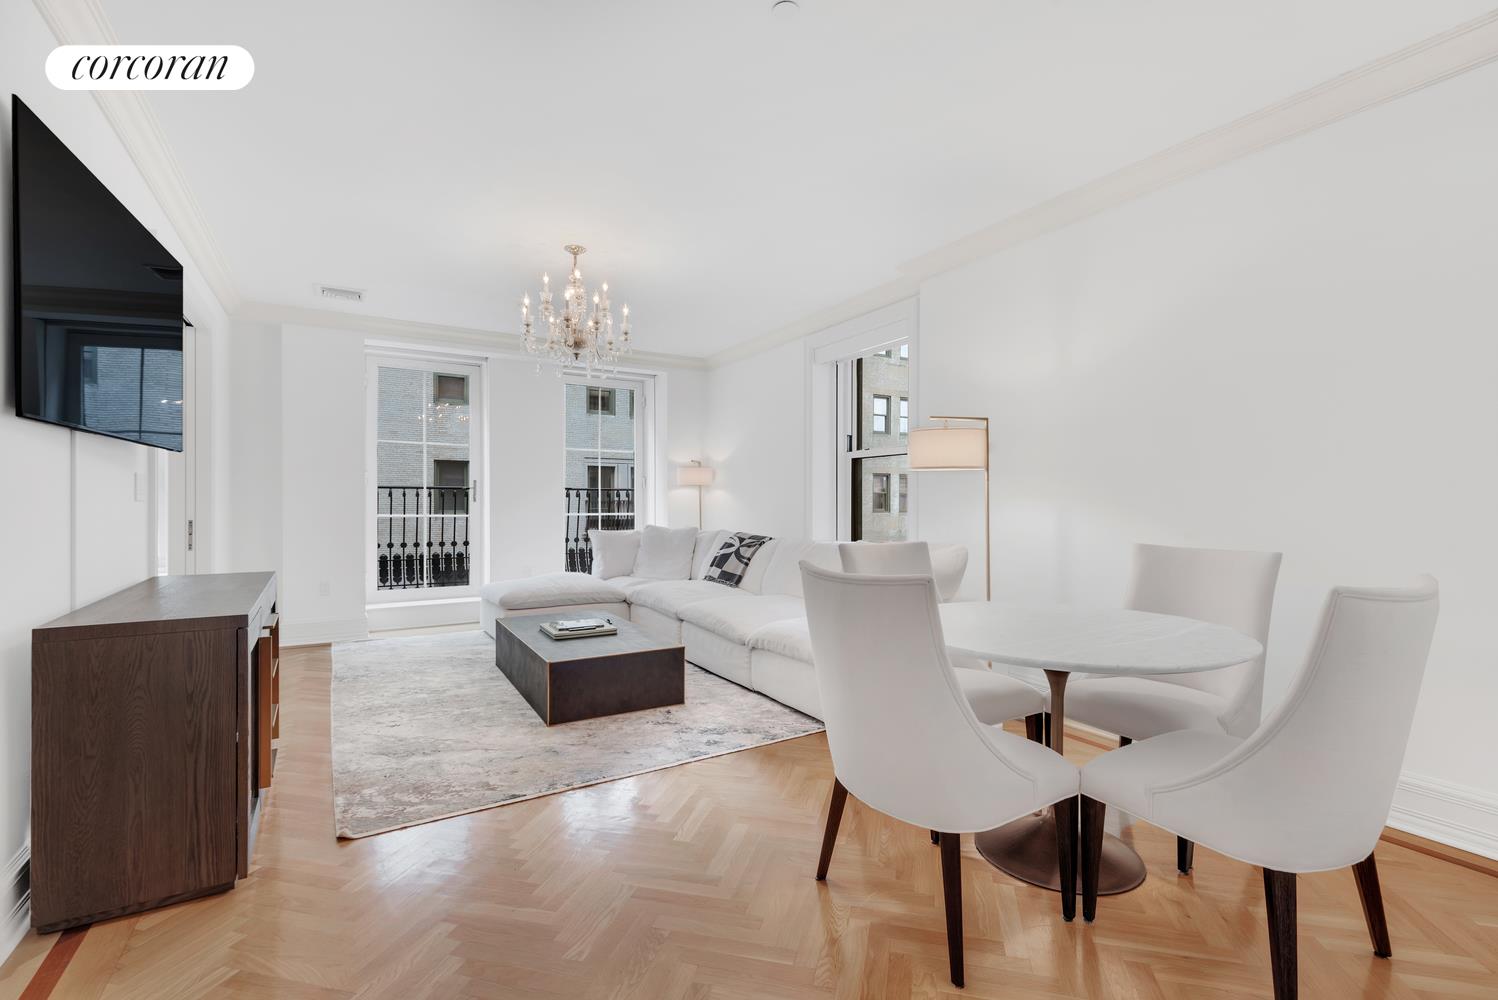 1 Central Park 1604, Central Park South, Midtown West, NYC - 2 Bedrooms  
2 Bathrooms  
4 Rooms - 